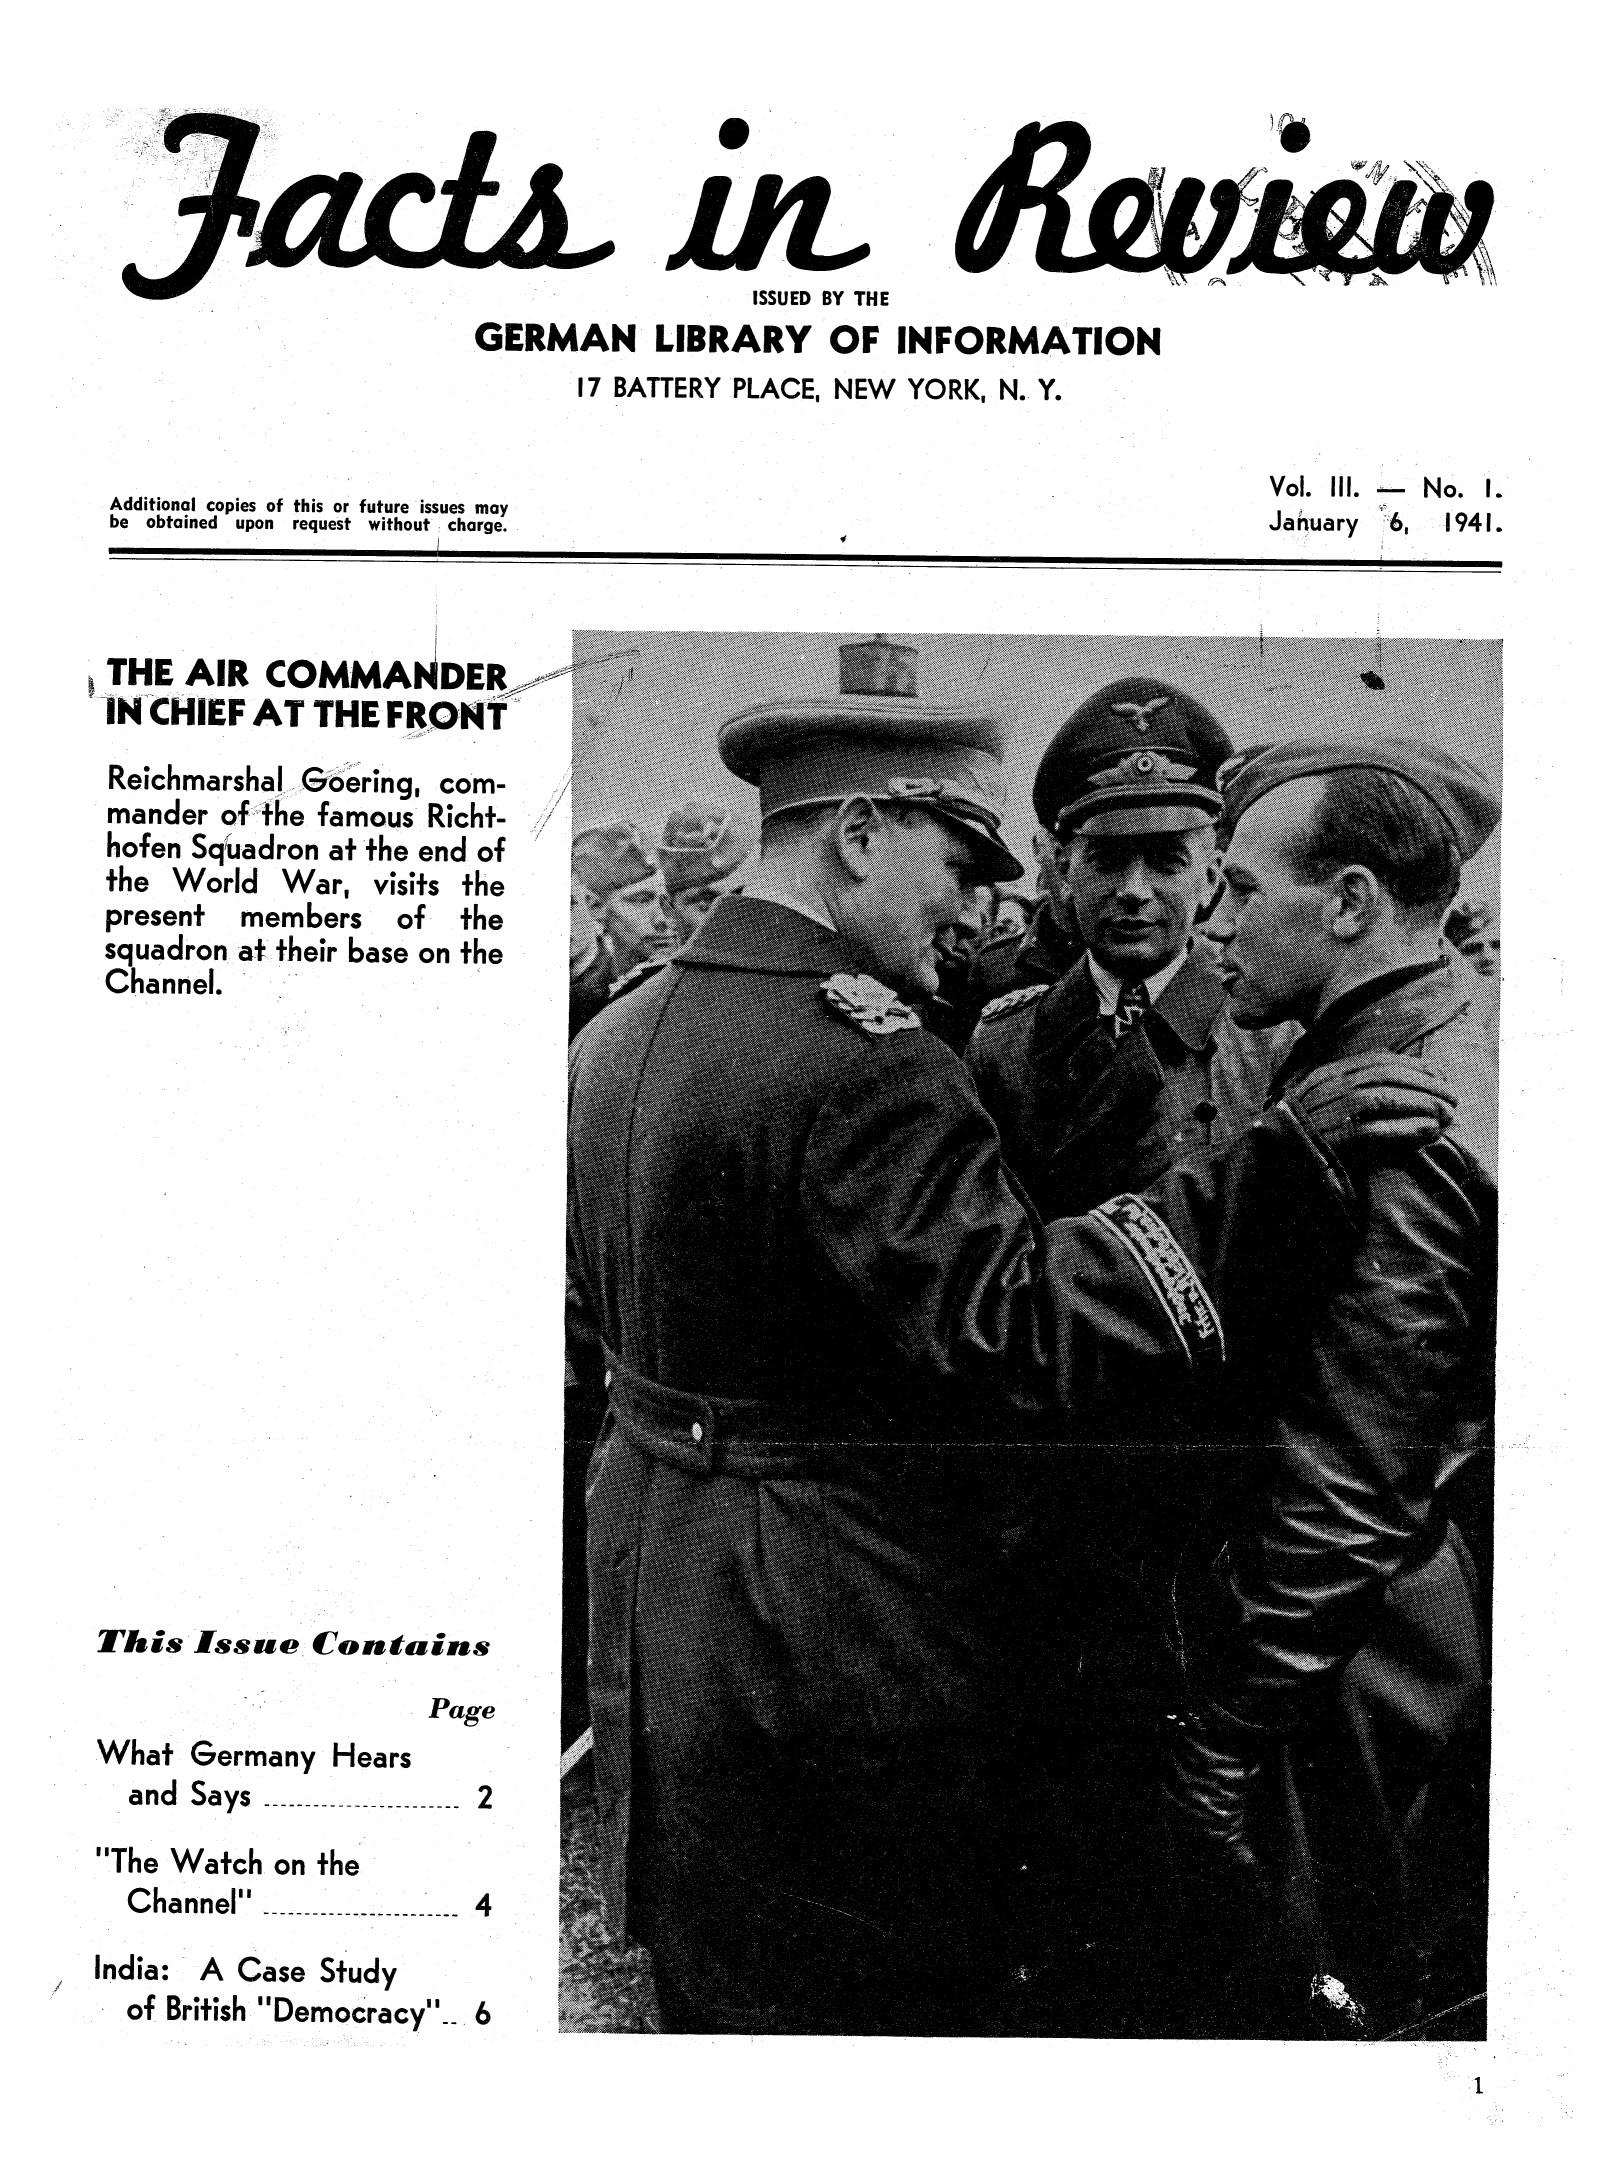 handle is hein.journals/facreiw3 and id is 1 raw text is: ï»¿ISSUED BY THEGERMAN LIBRARY OF INFORMATION17 BATTERY PLACE, NEW YORK, N. Y.Additional copies of this or future issues maybe obtained   upon  request without charge.Vol. Ill.     No. I.January    6,   1941.THE AIR COMMAWDERIN CHIEF AT THE FRONTReichmarshal Gering, com-mander of the famous Richt-hofen Squadron at the end ofthe World War, visits thepresent members of thesquadron at their base on theChannel.This Issue ContainsPageWhat Germany Hearsand Says               2The Watch on theChannel-----------   4India: A Case Studyof British Democracy  61